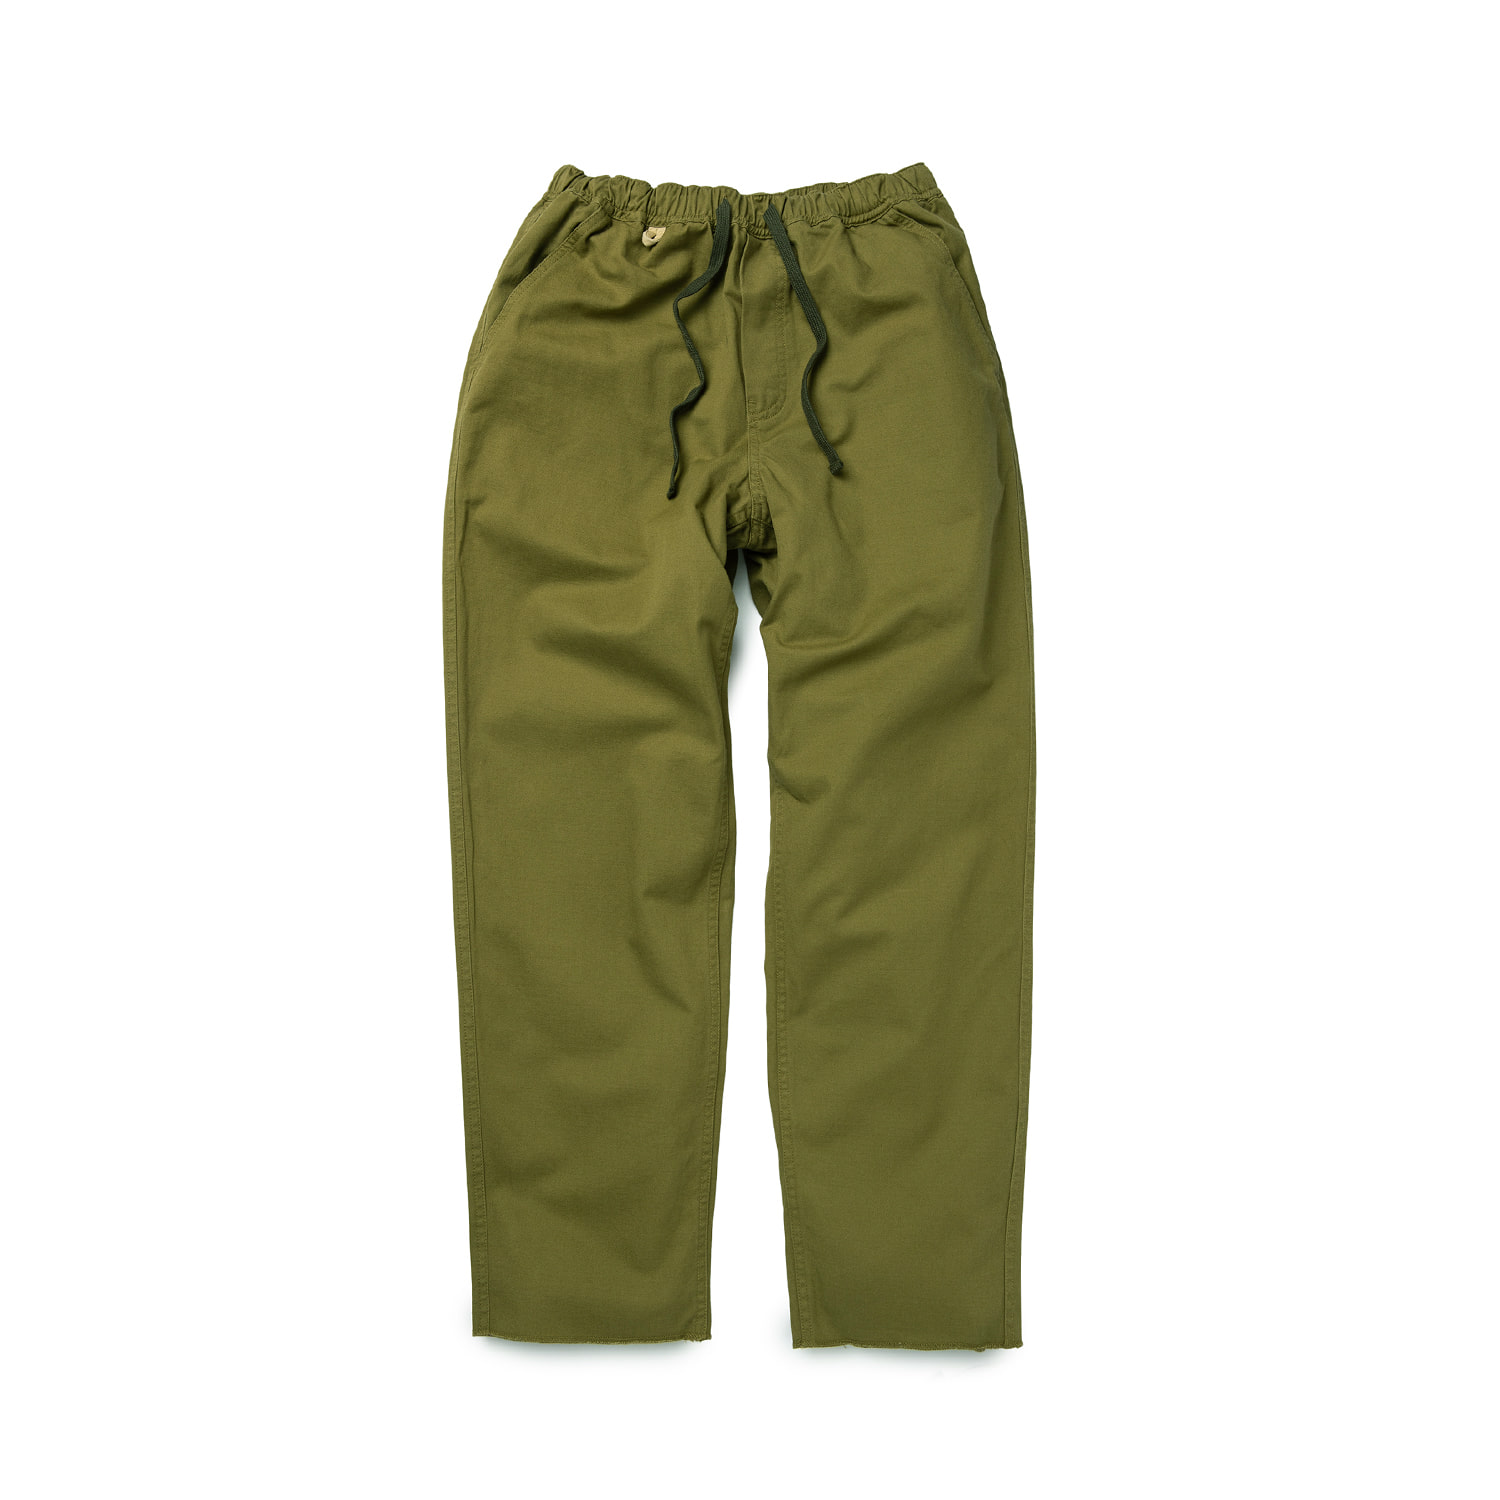 Washed Self-Edge Work Pants &quot;OLIVE&quot;SEASON OFF